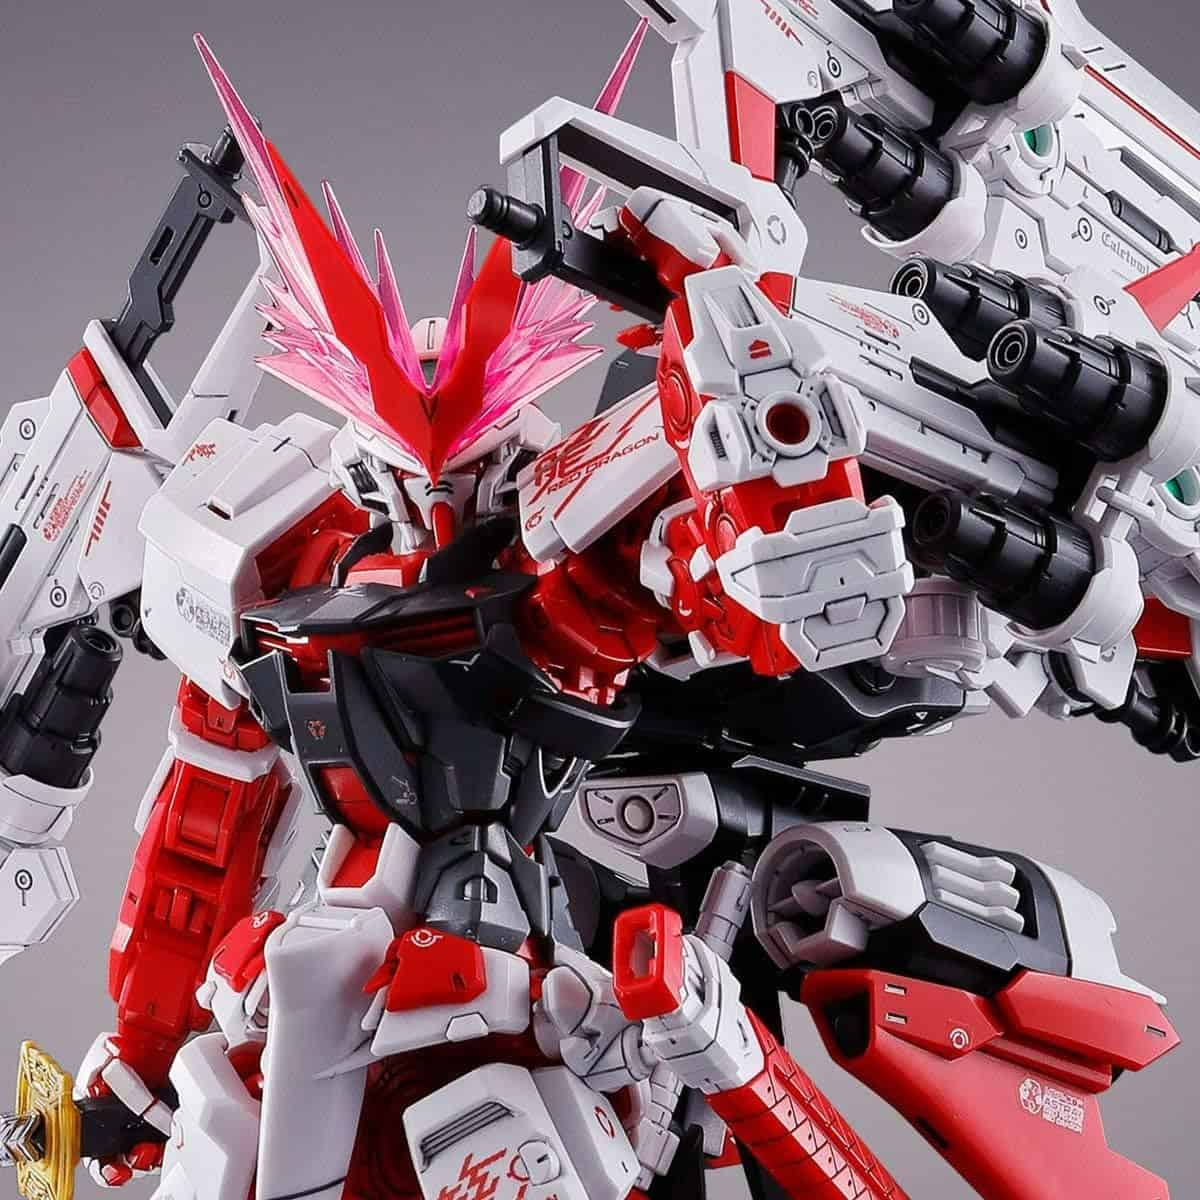 6 Most Expensive Gundam Model Kits You Can Buy on Amazon - Rarest.org